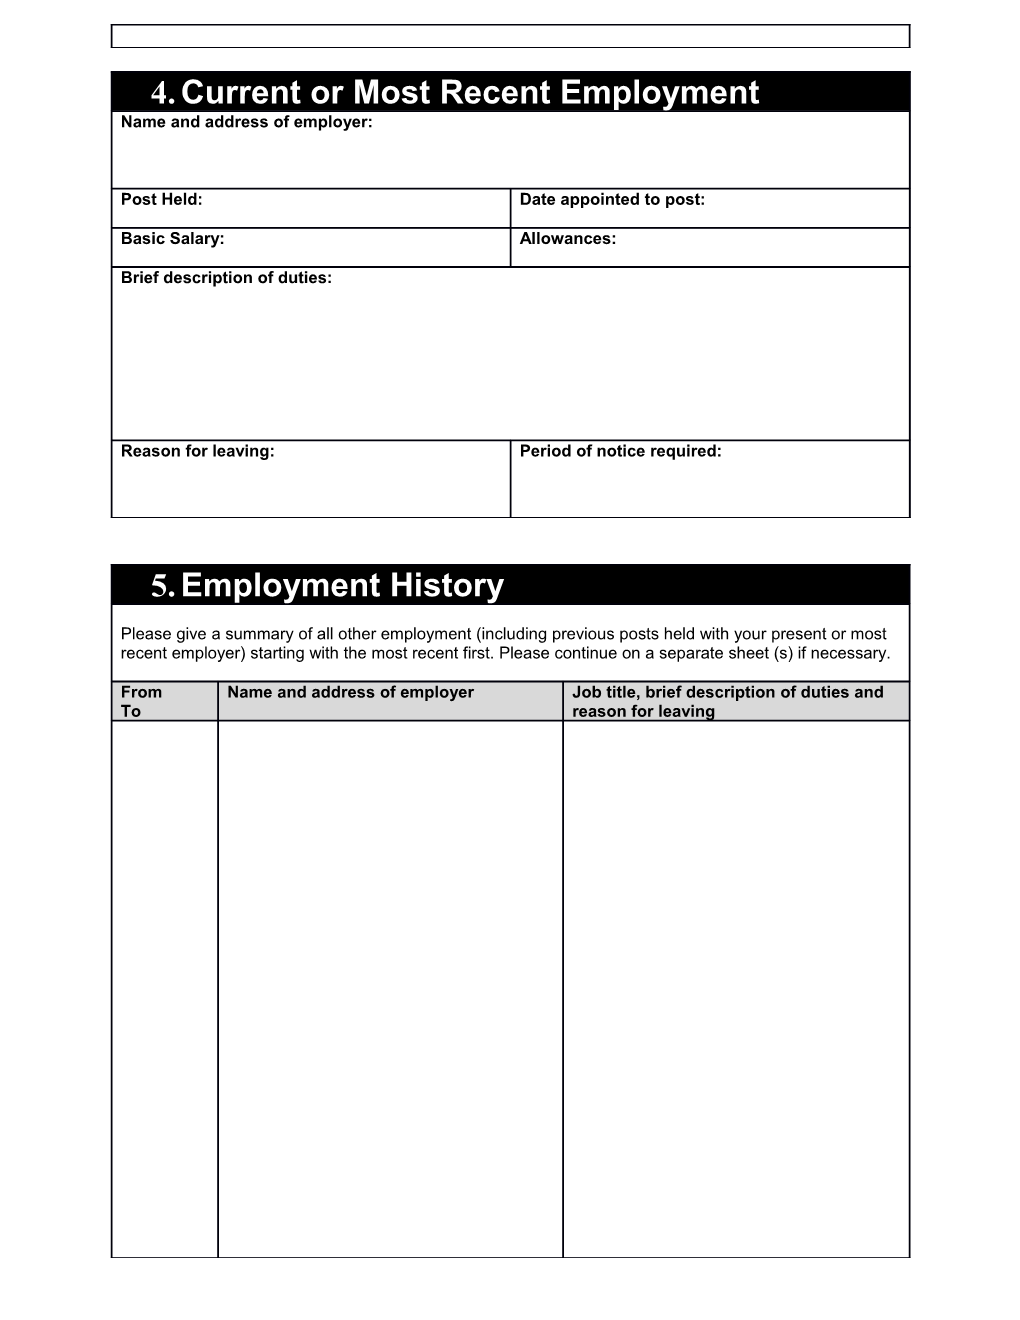 Personal Details and Monitoring Information Form s1